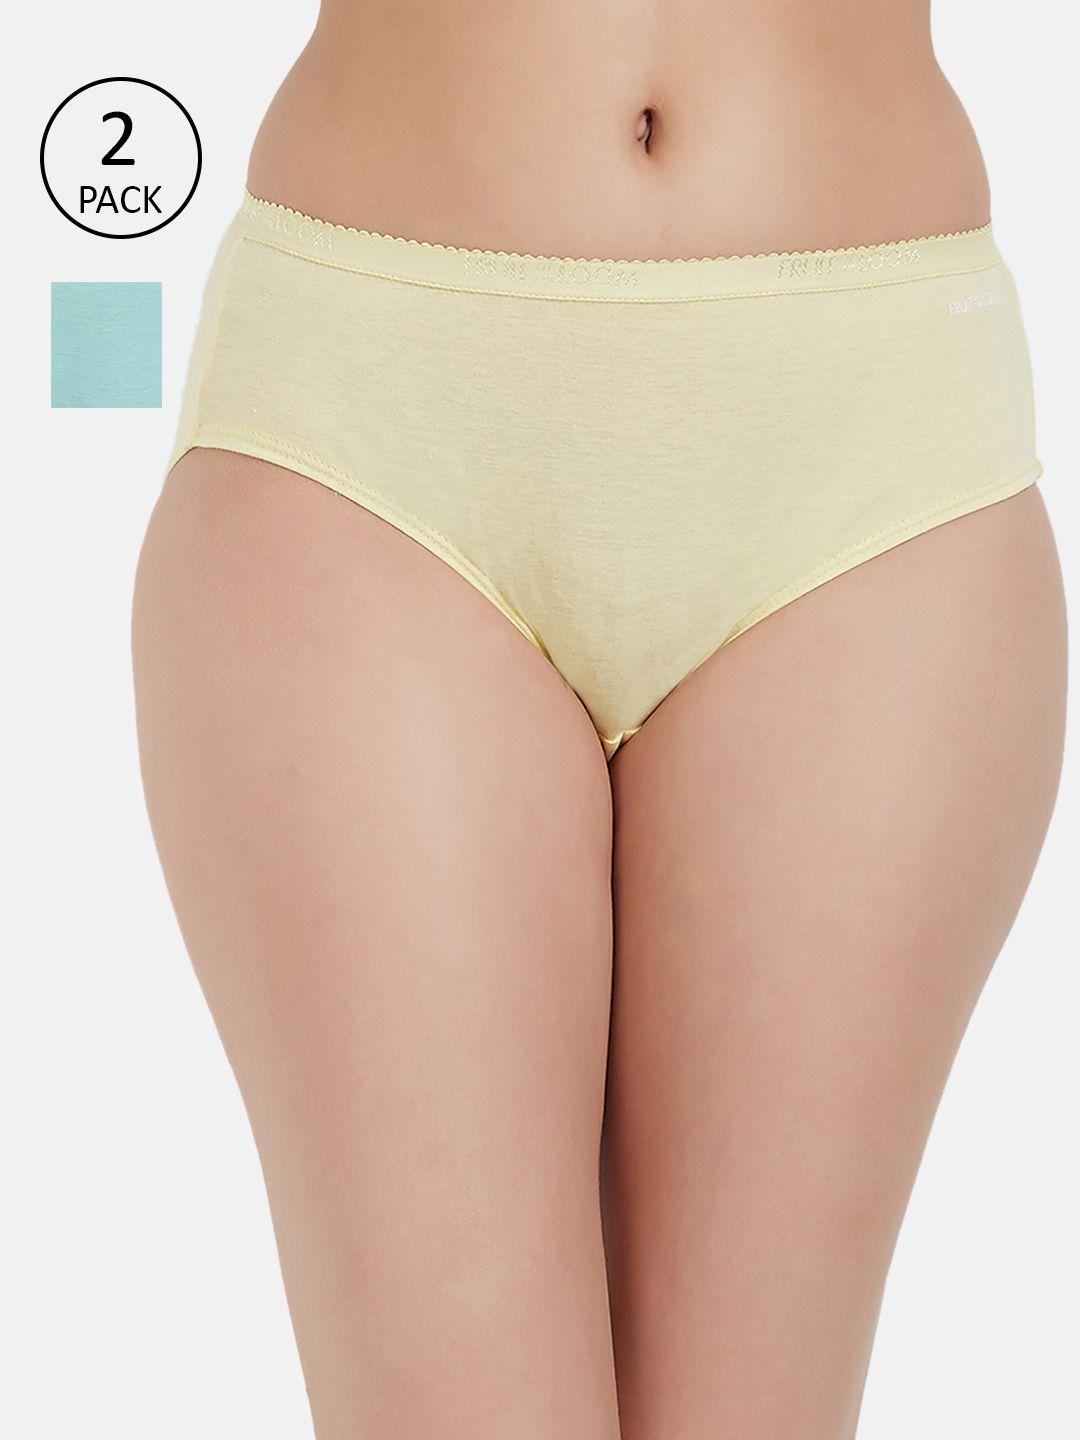 fruit-of-the-loom-women-pack-of-2-solid-hipster-briefs-fhps02-2p-la1s1